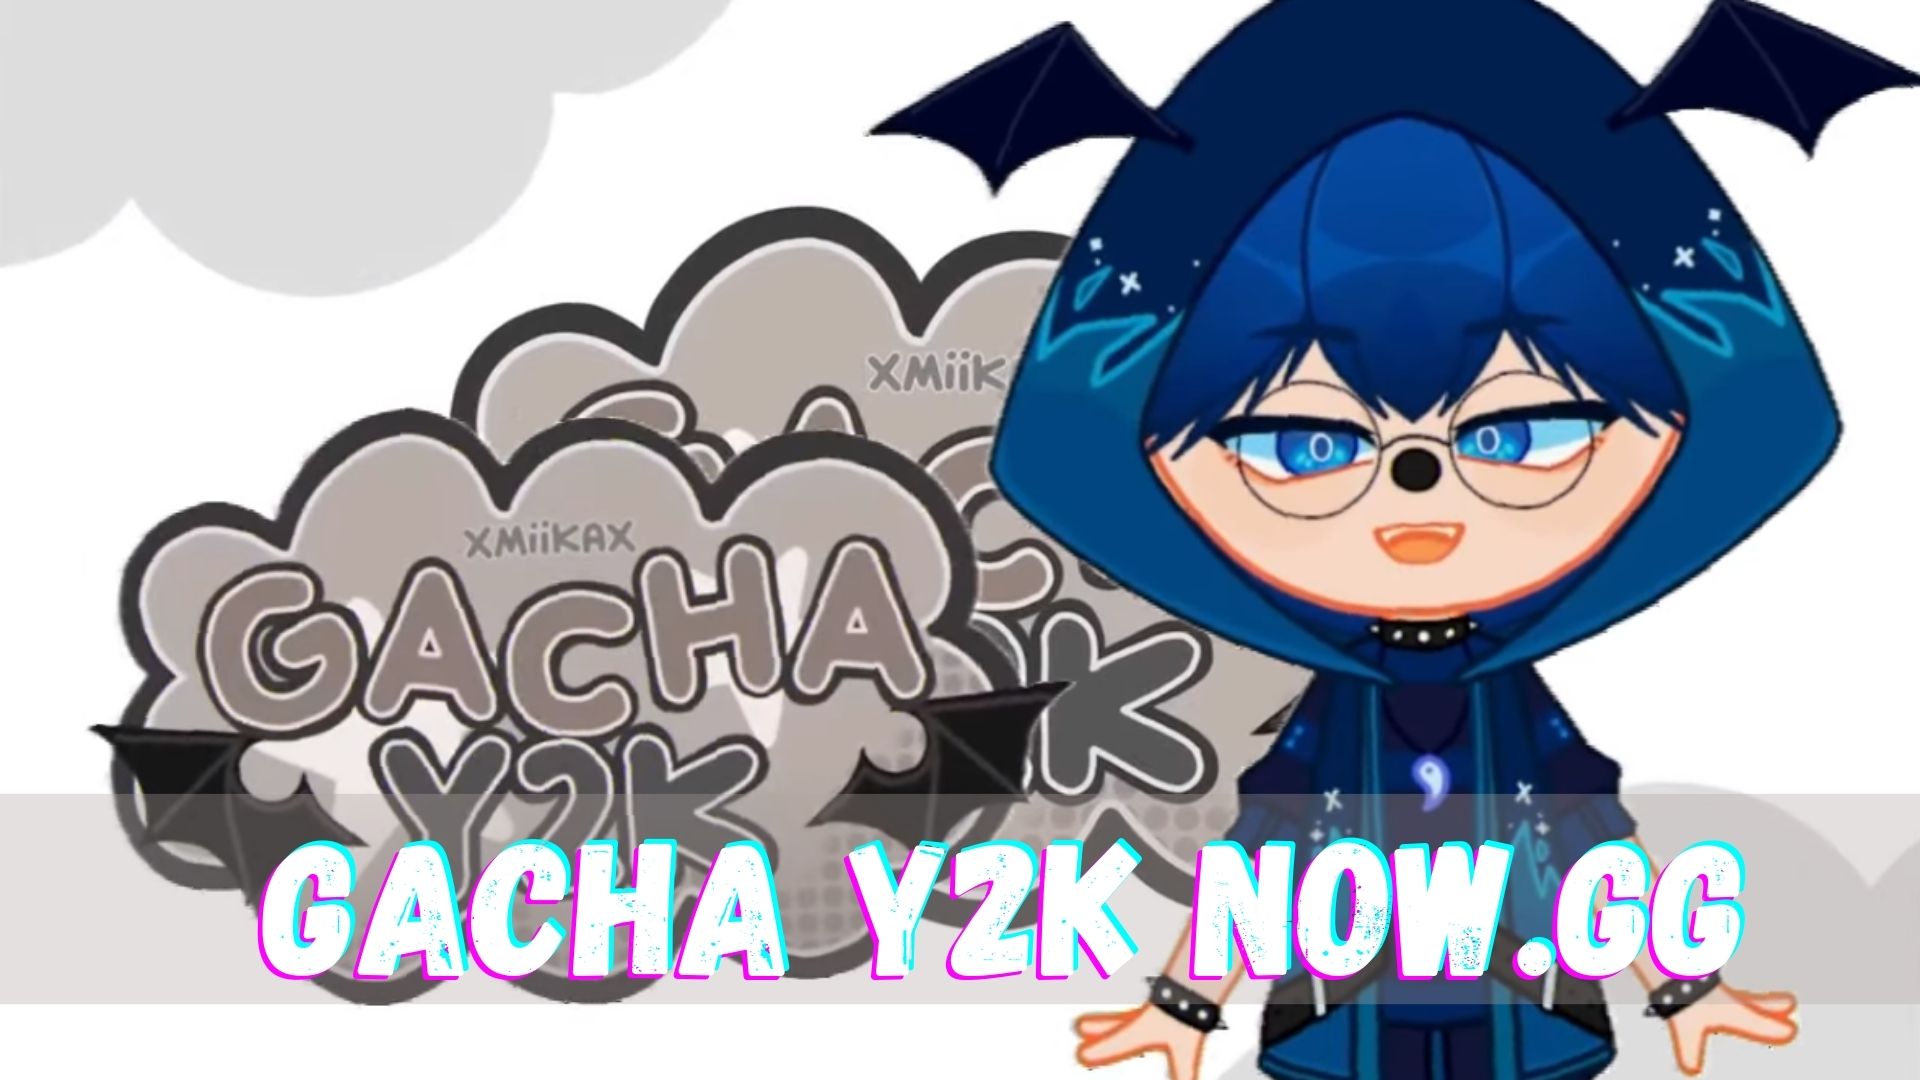 Play Gacha life Online in Your Browser with now.gg